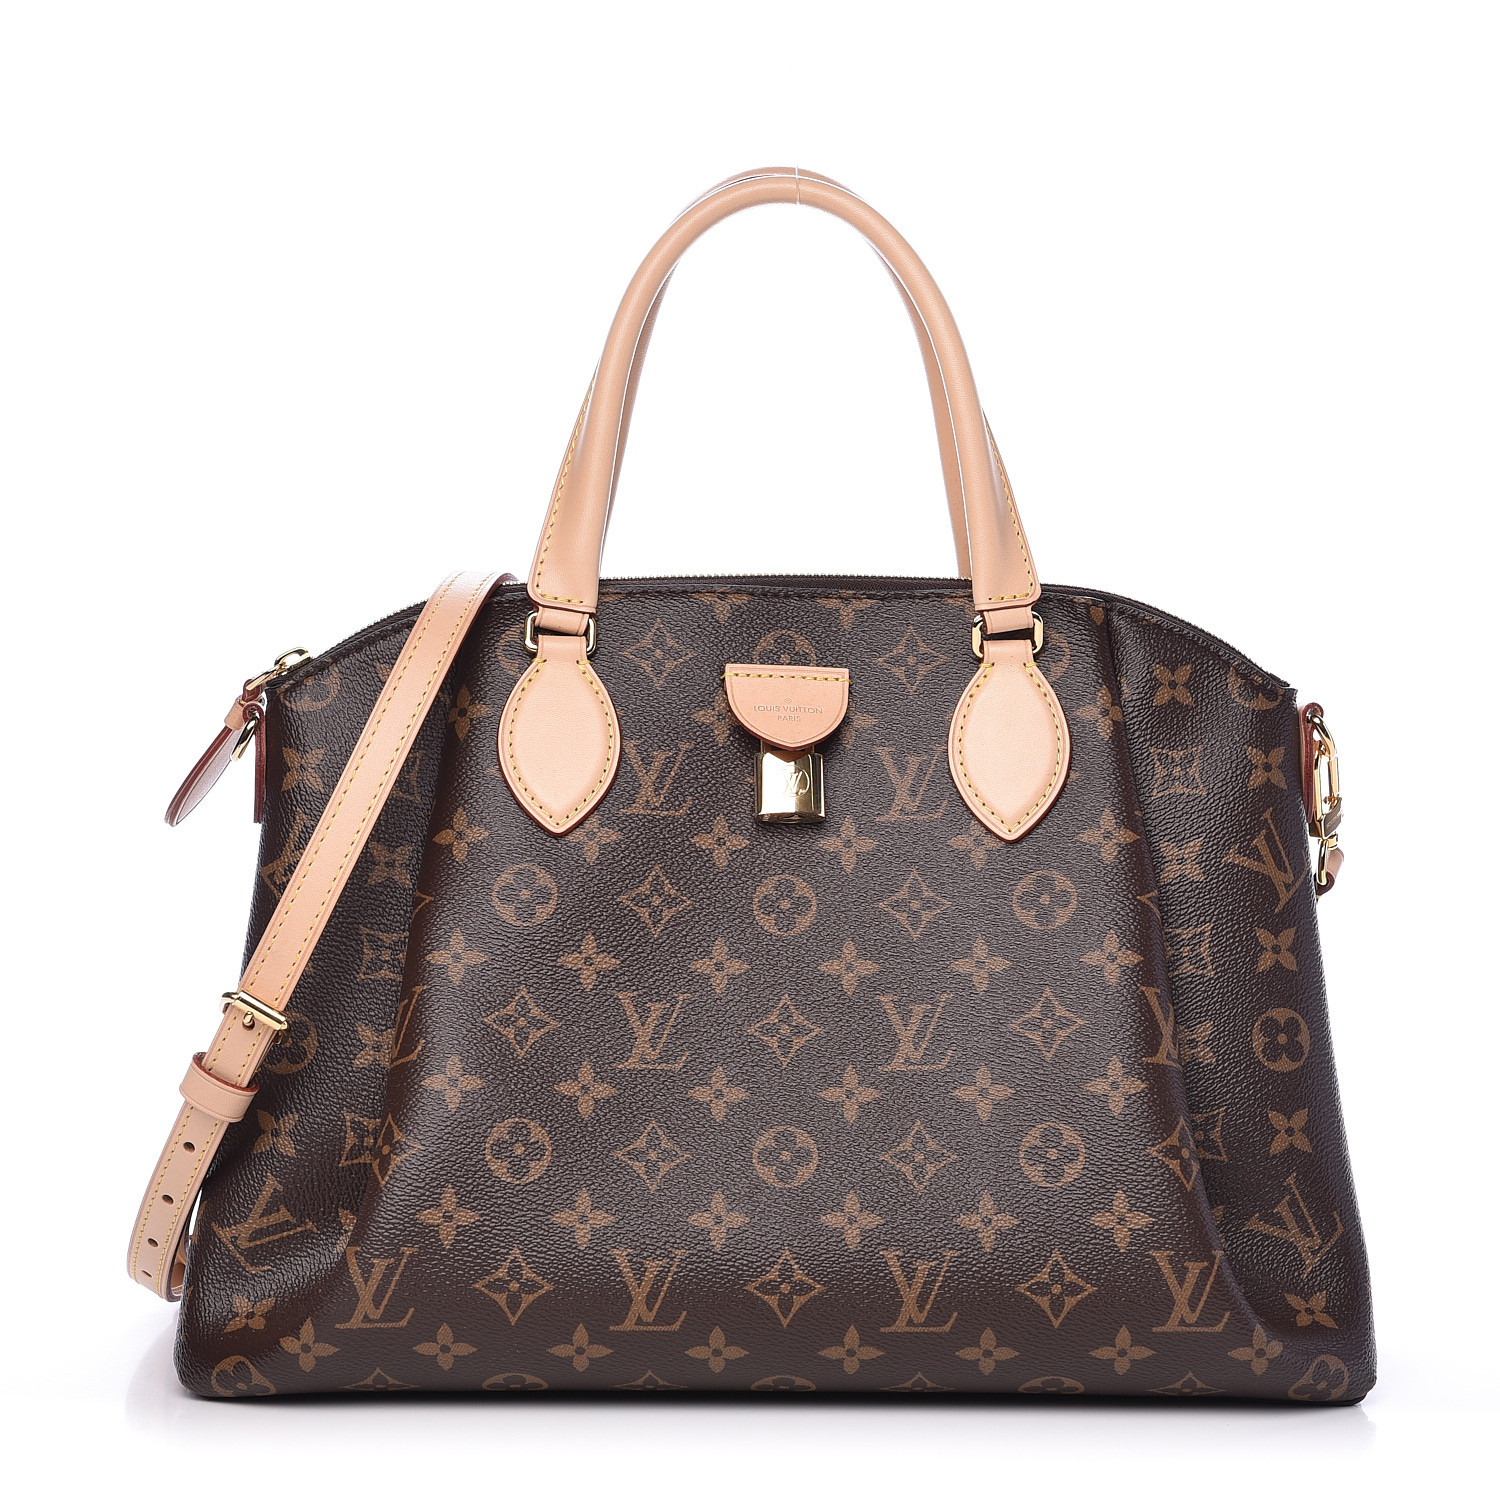 Arm candy of the week: Louis Vuitton's exclusive side trunk PM